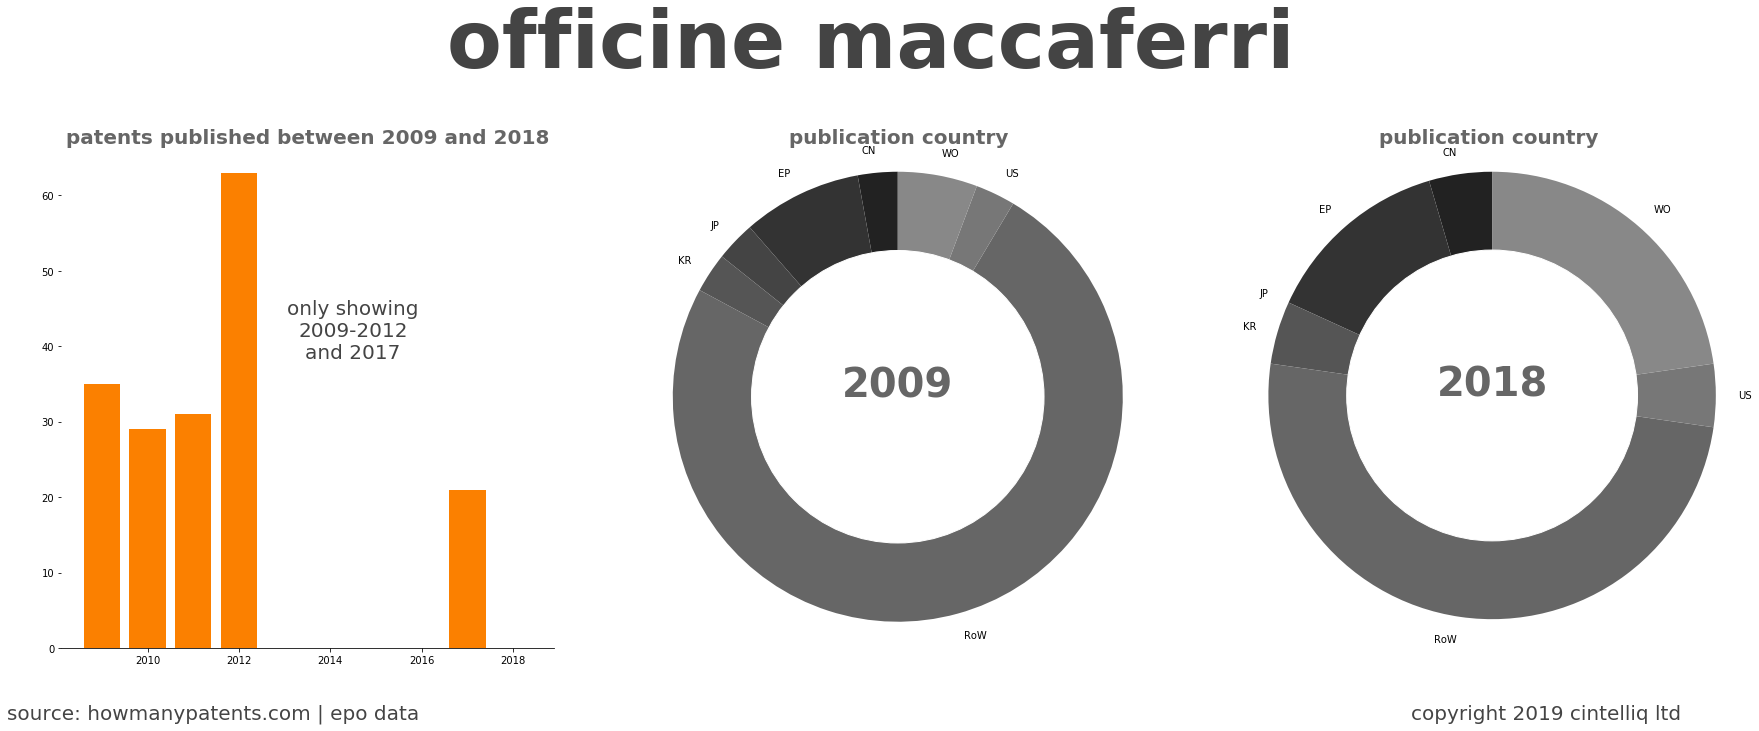 summary of patents for Officine Maccaferri